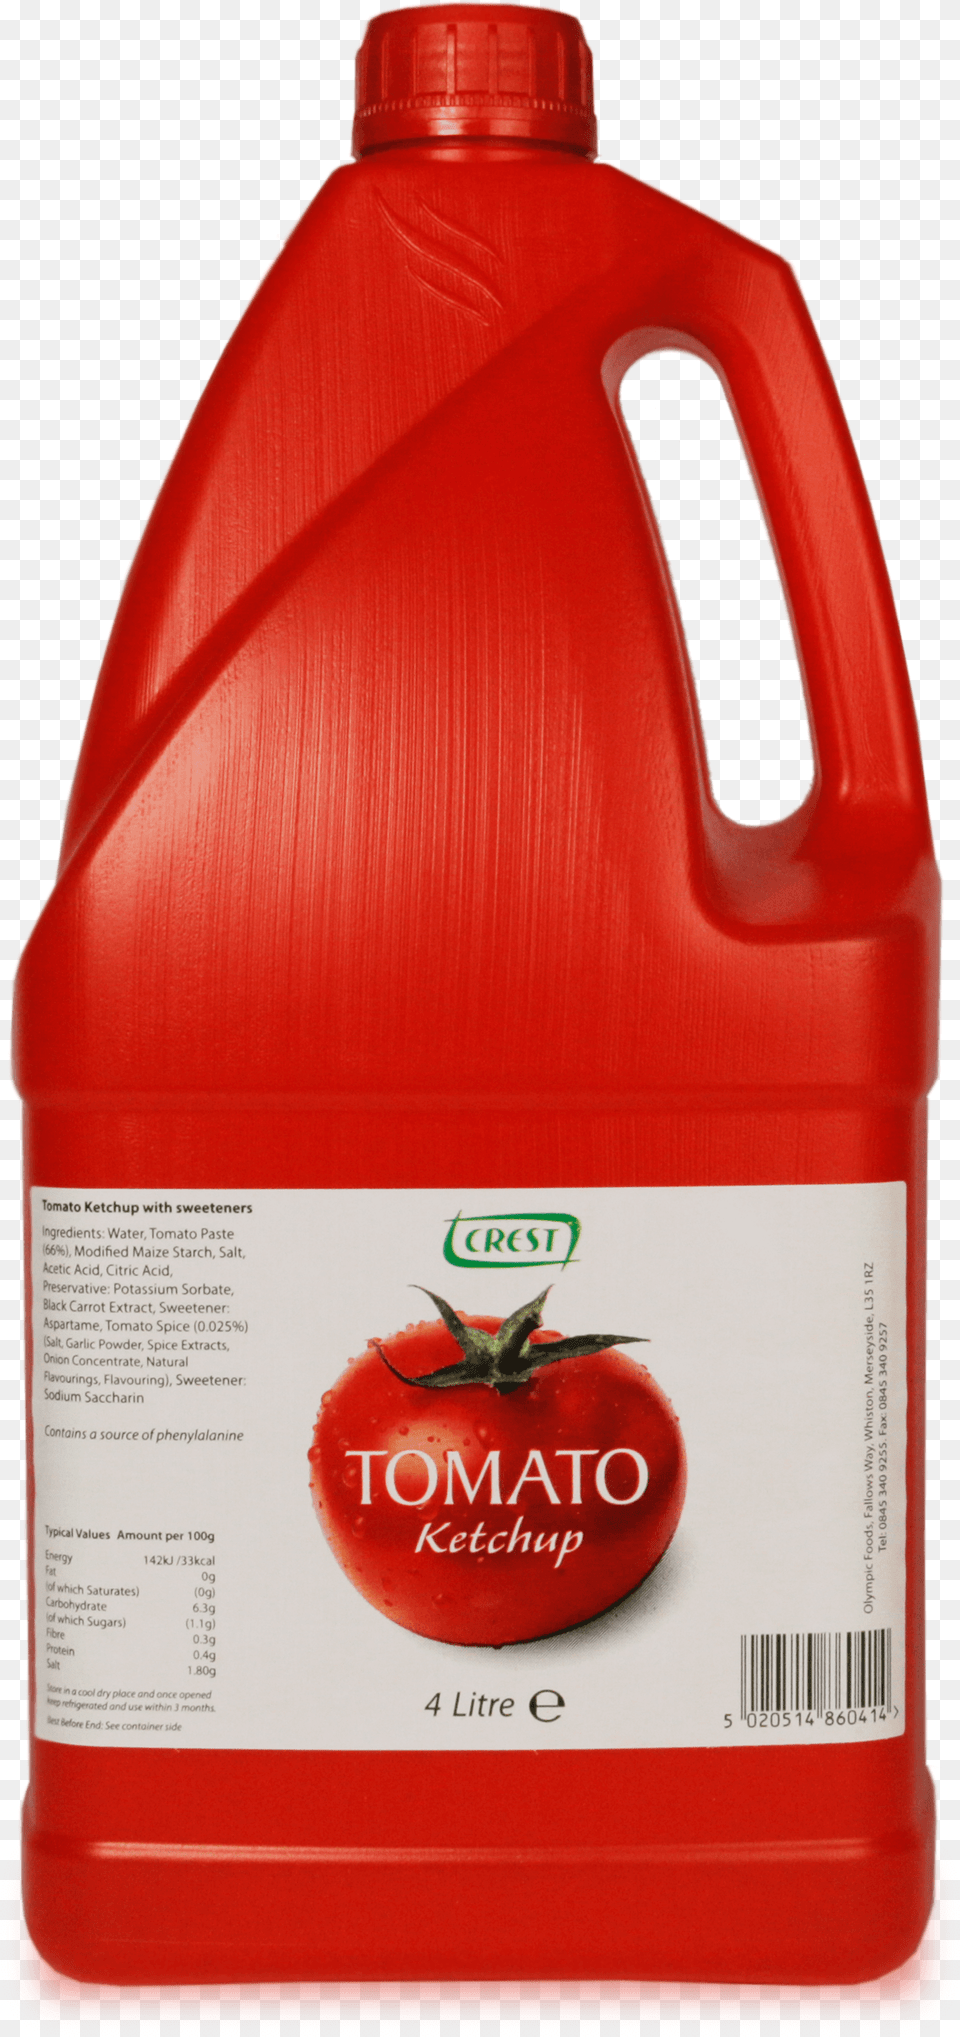 Crest Tomato Ketchup 4l Jug Troy39s Tomato Ketchup, Food, Bottle, Shaker Free Png